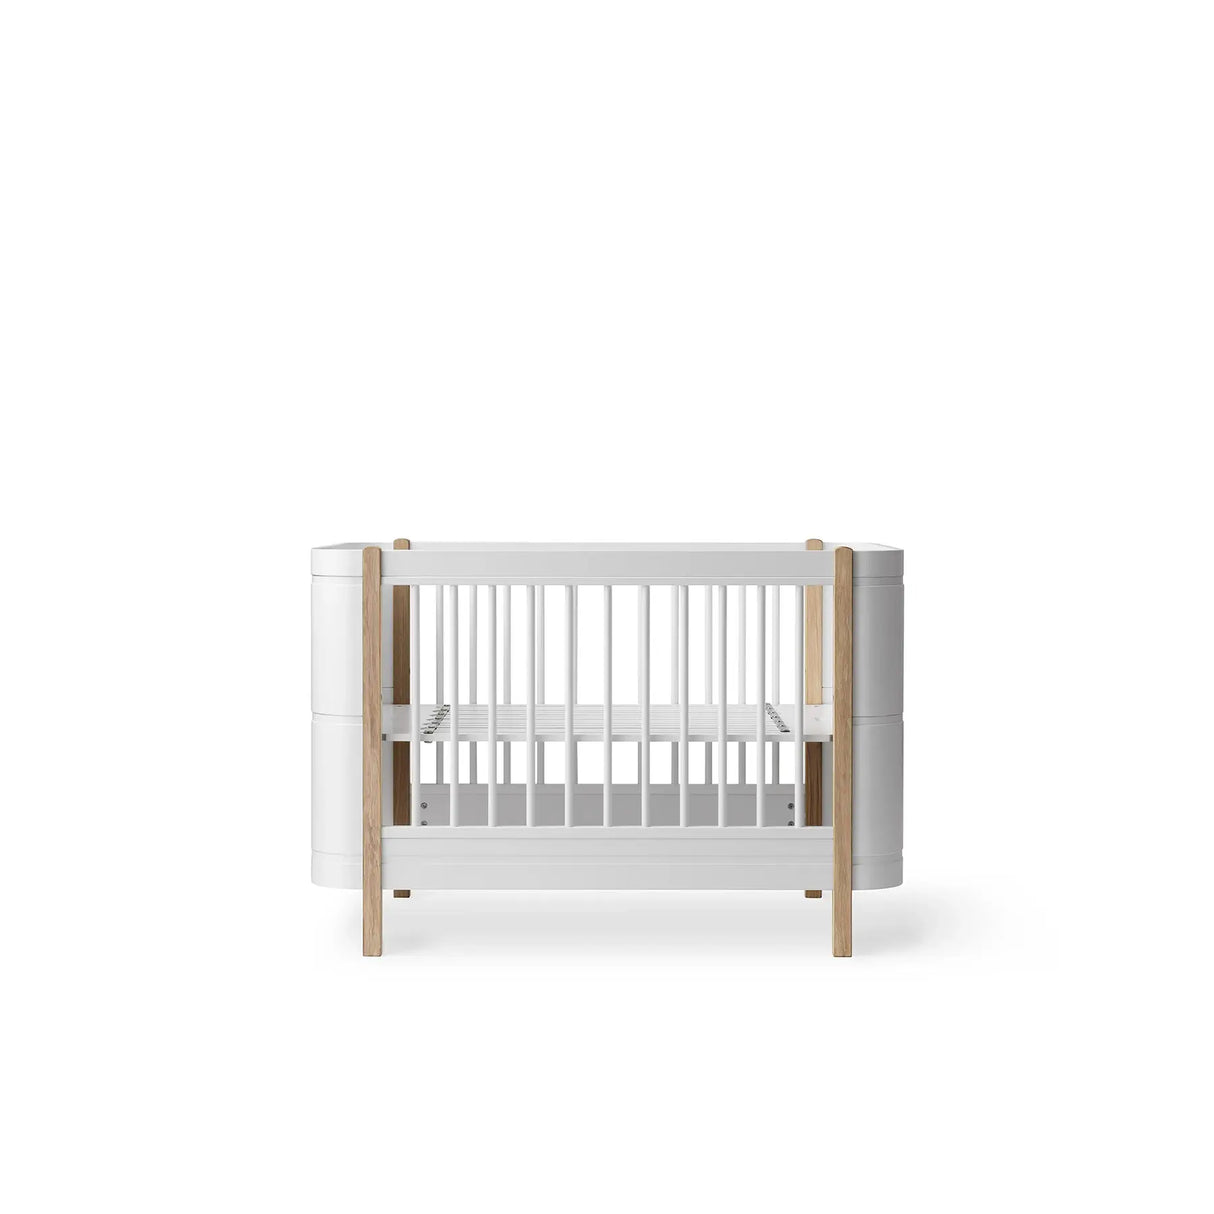 FREE Installation - Oliver Furniture Wood Mini+ Cot in White/Oak - Little Snoozes